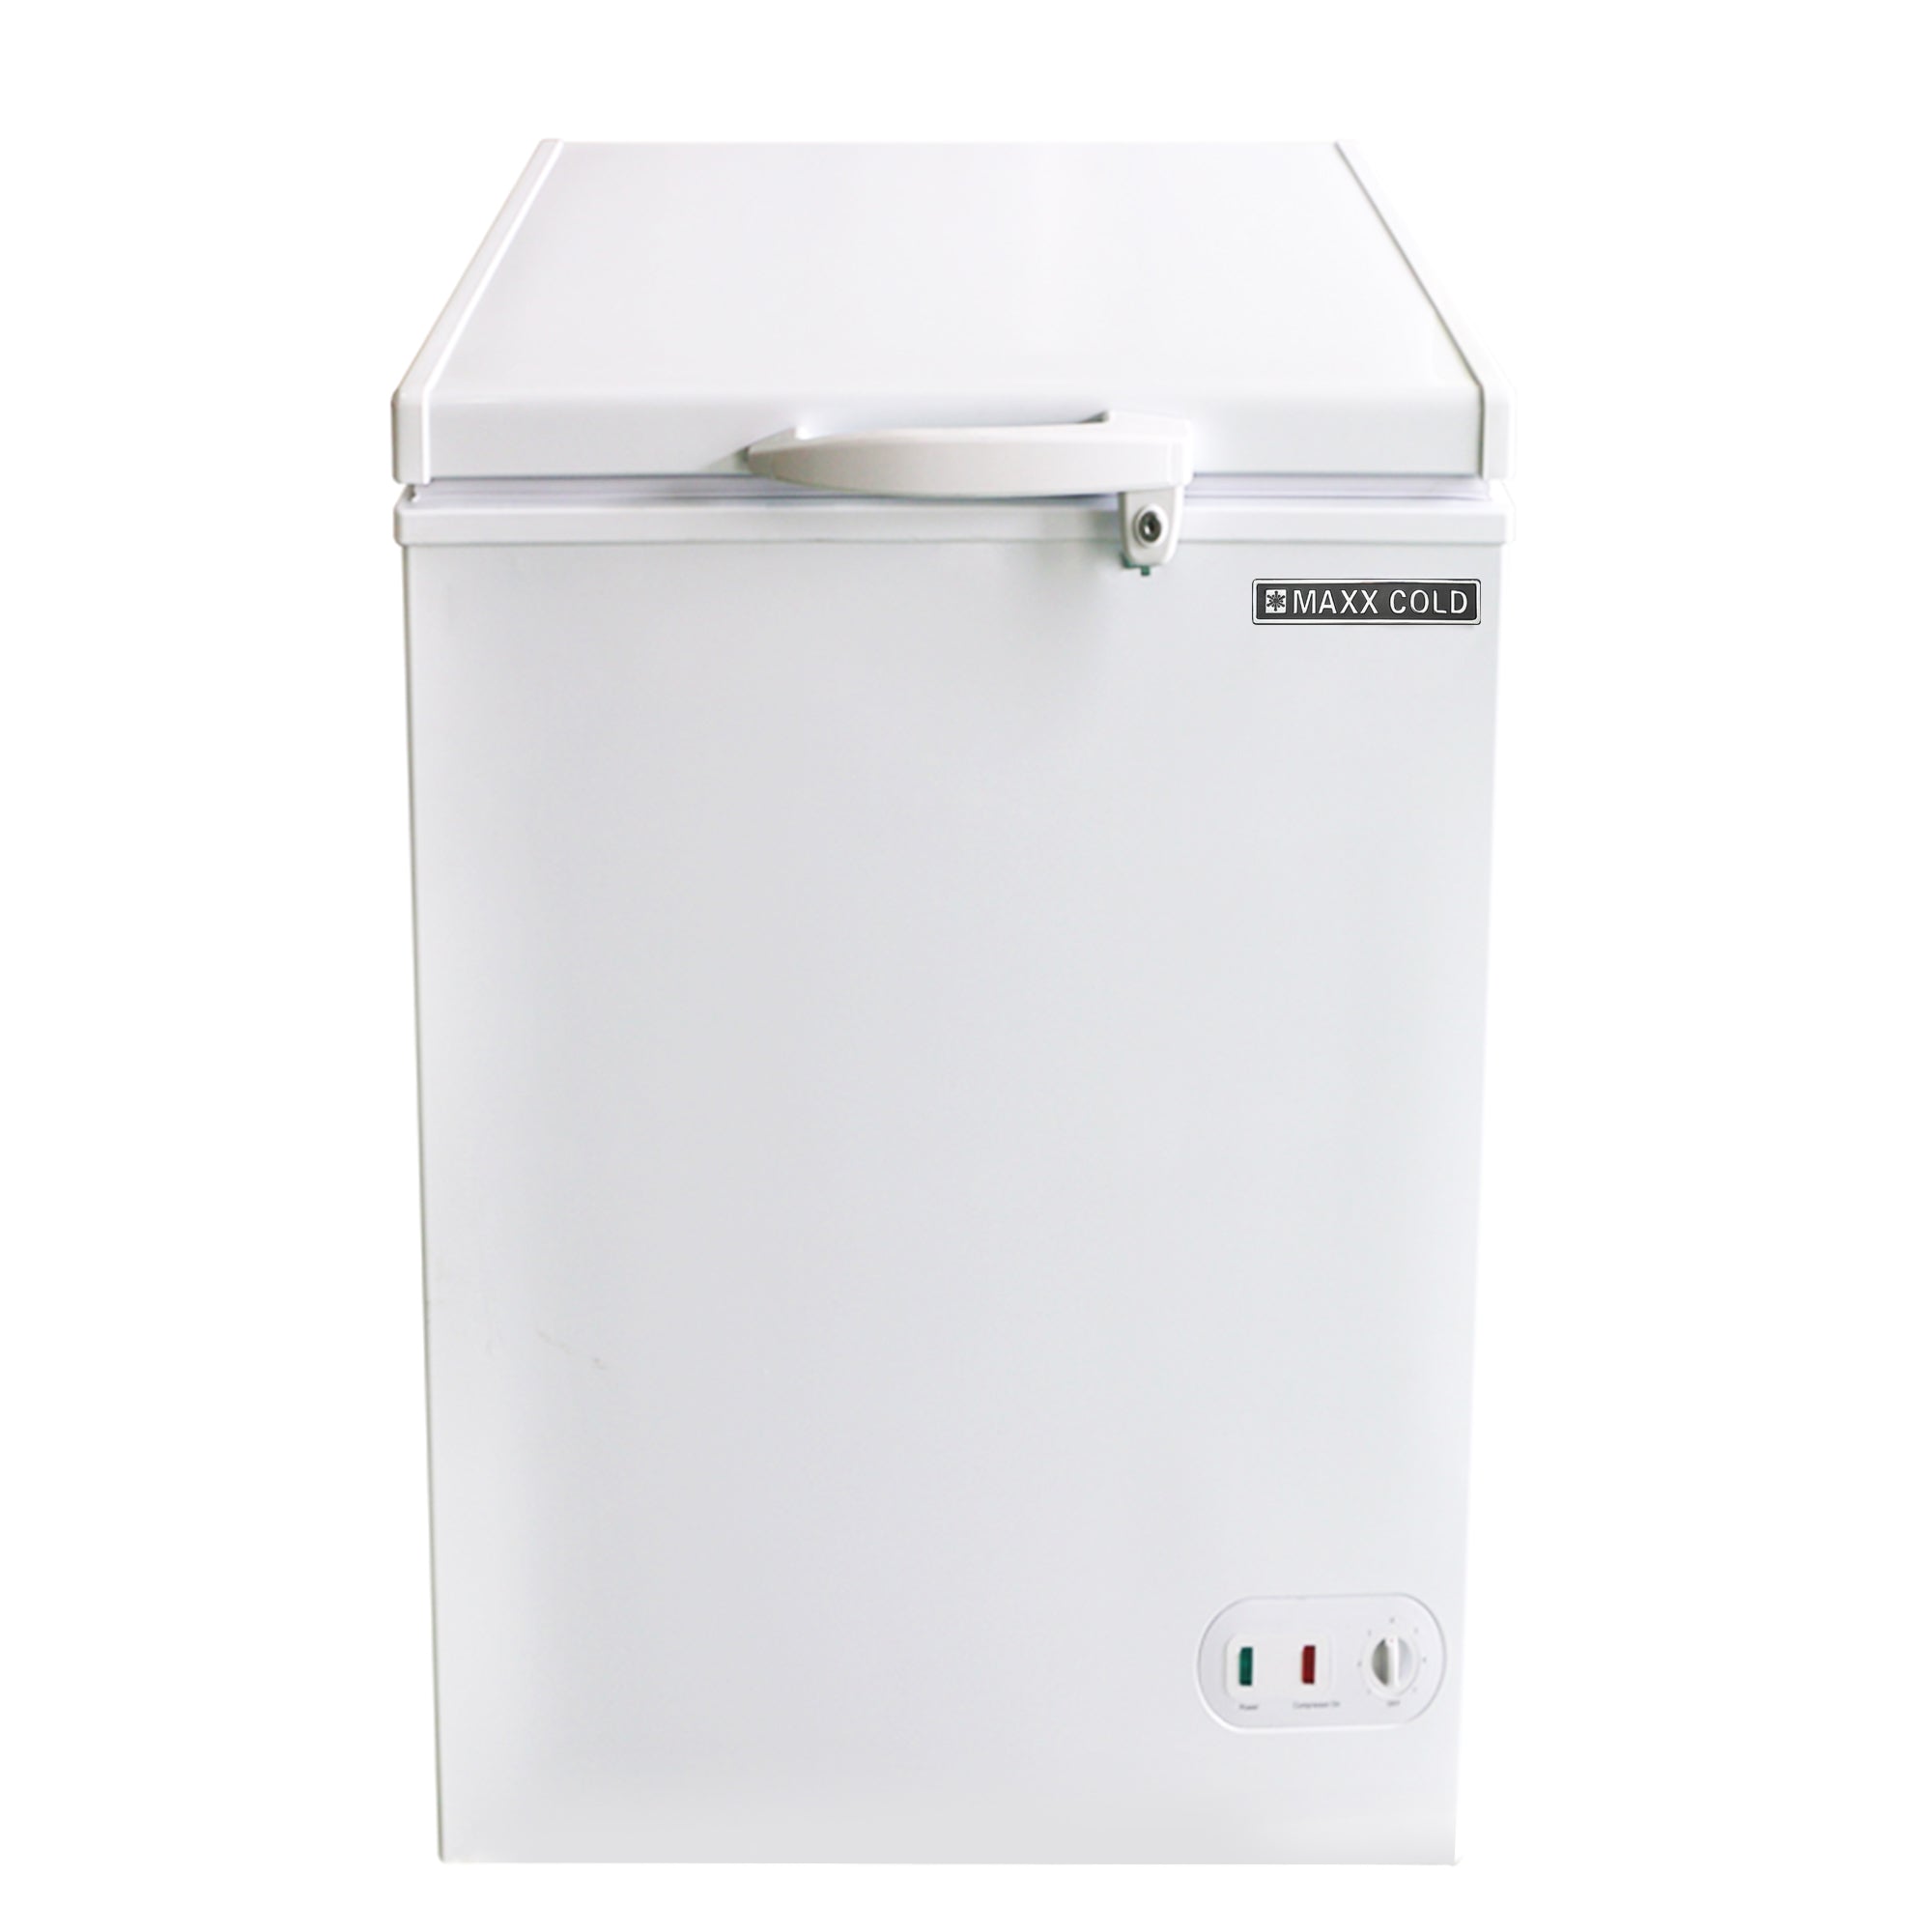 Maxx Cold - MXSH3.4SHC, Maxx Cold Compact Chest Freezer with Solid Top, 22.8"W, 3.4 cu. ft. Storage Capacity, Locking Lid, Garage Ready, in White